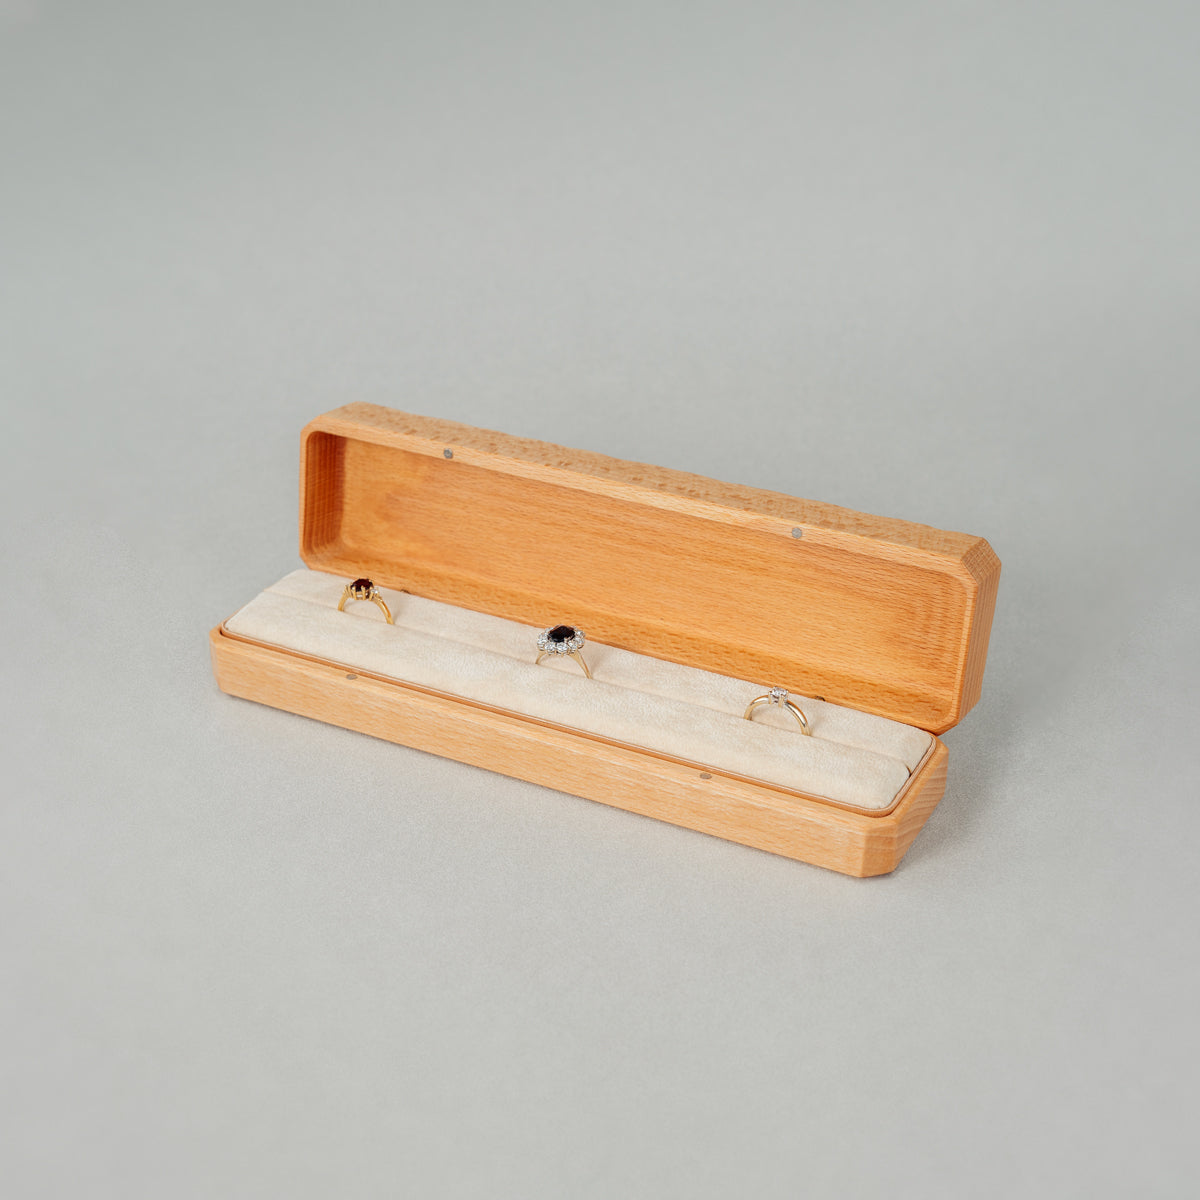 Open Jewellery Box made of beech wood while The interior of the box is lined with soft velvet with three rings placed inside.